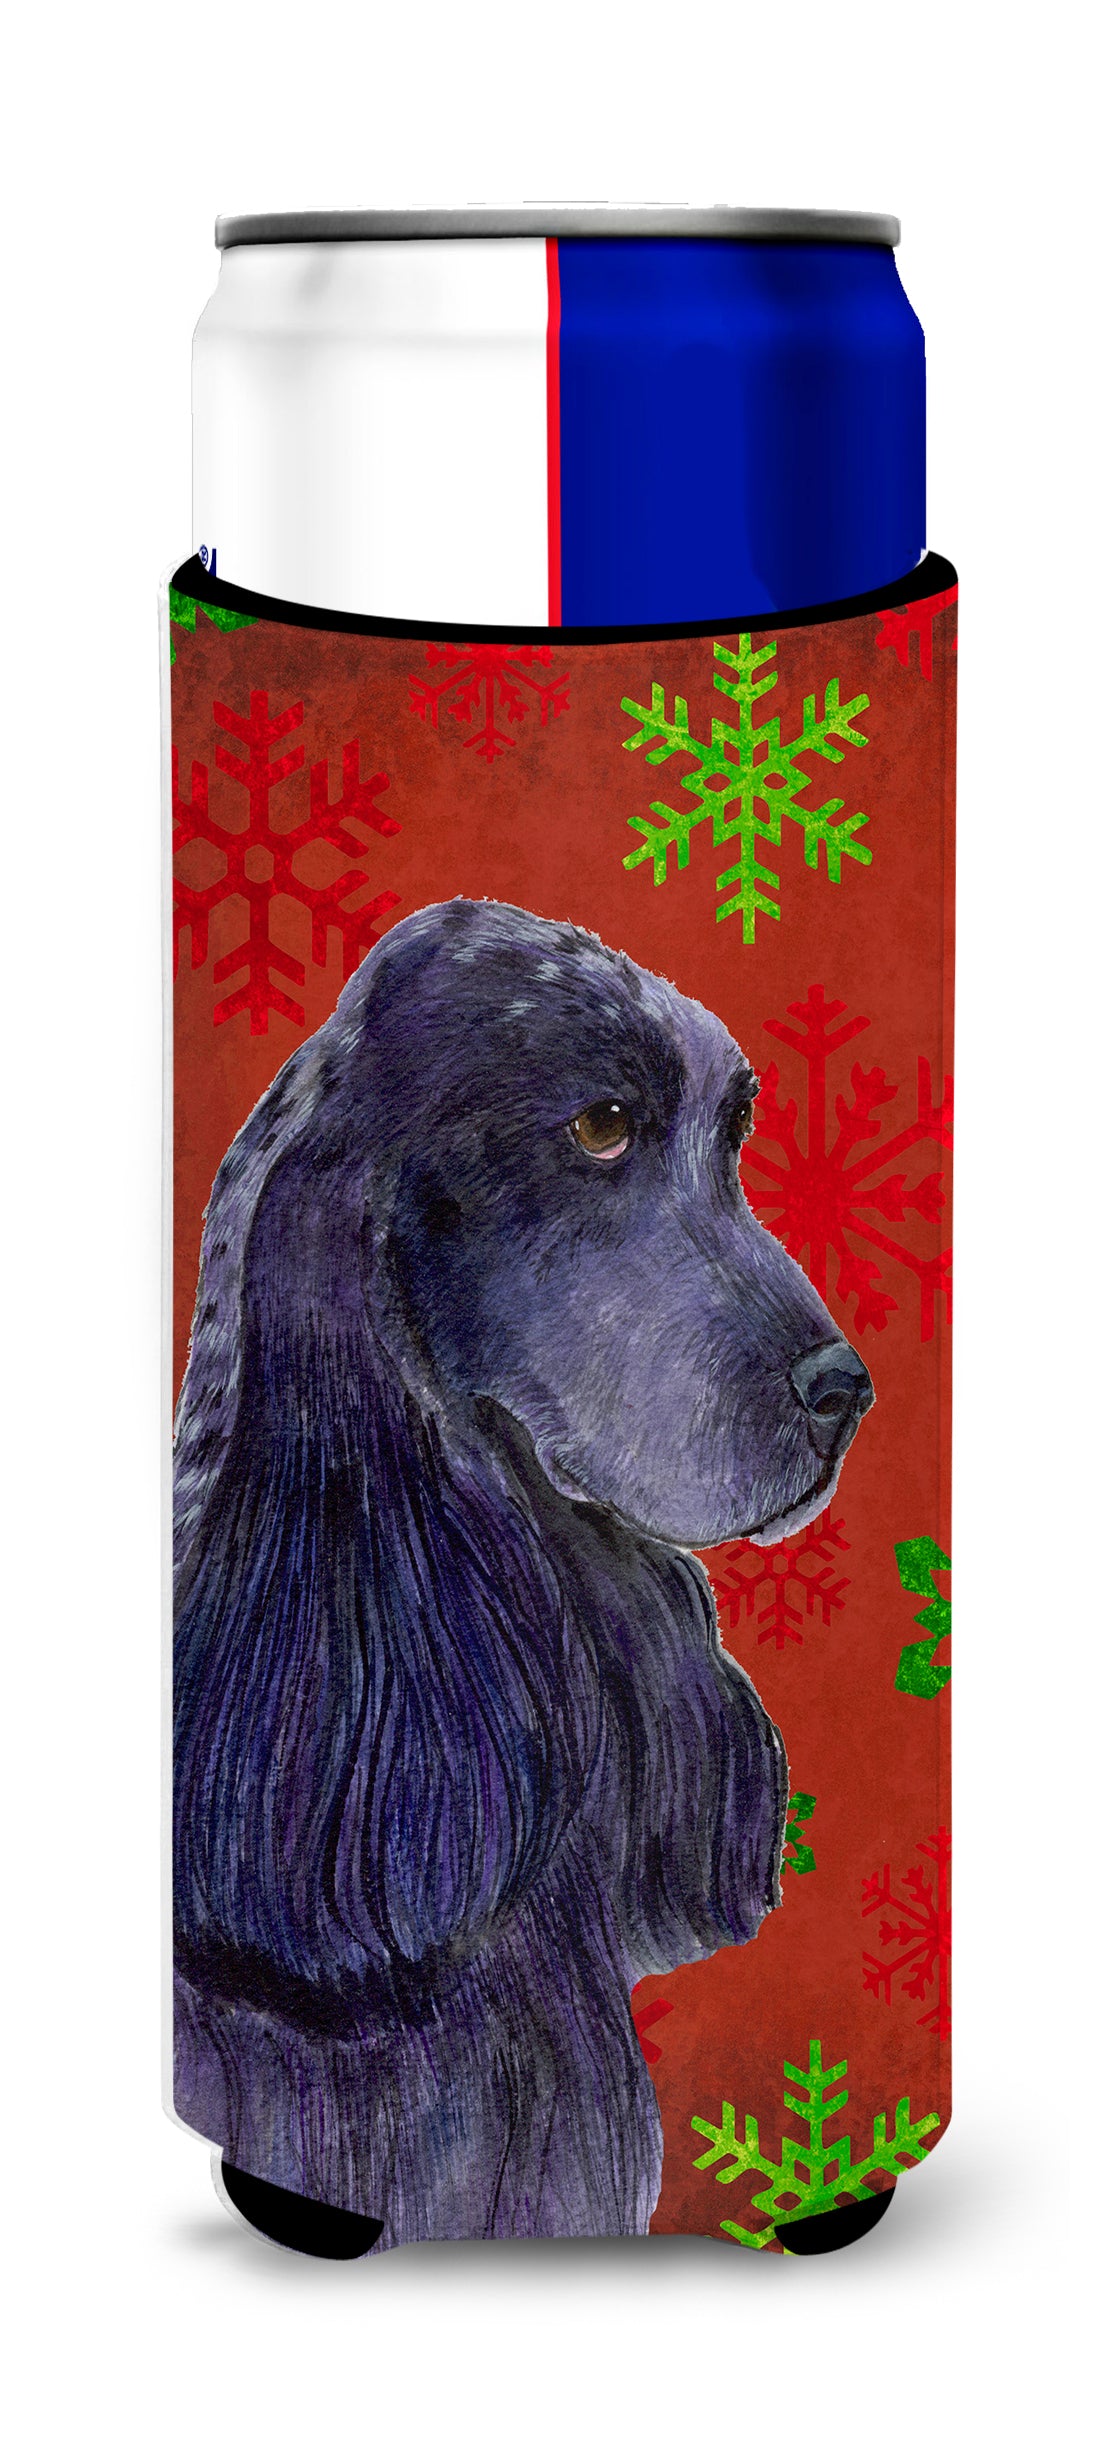 Cocker Spaniel Red Green Snowflakes Christmas Ultra Beverage Insulators for slim cans SS4678MUK.